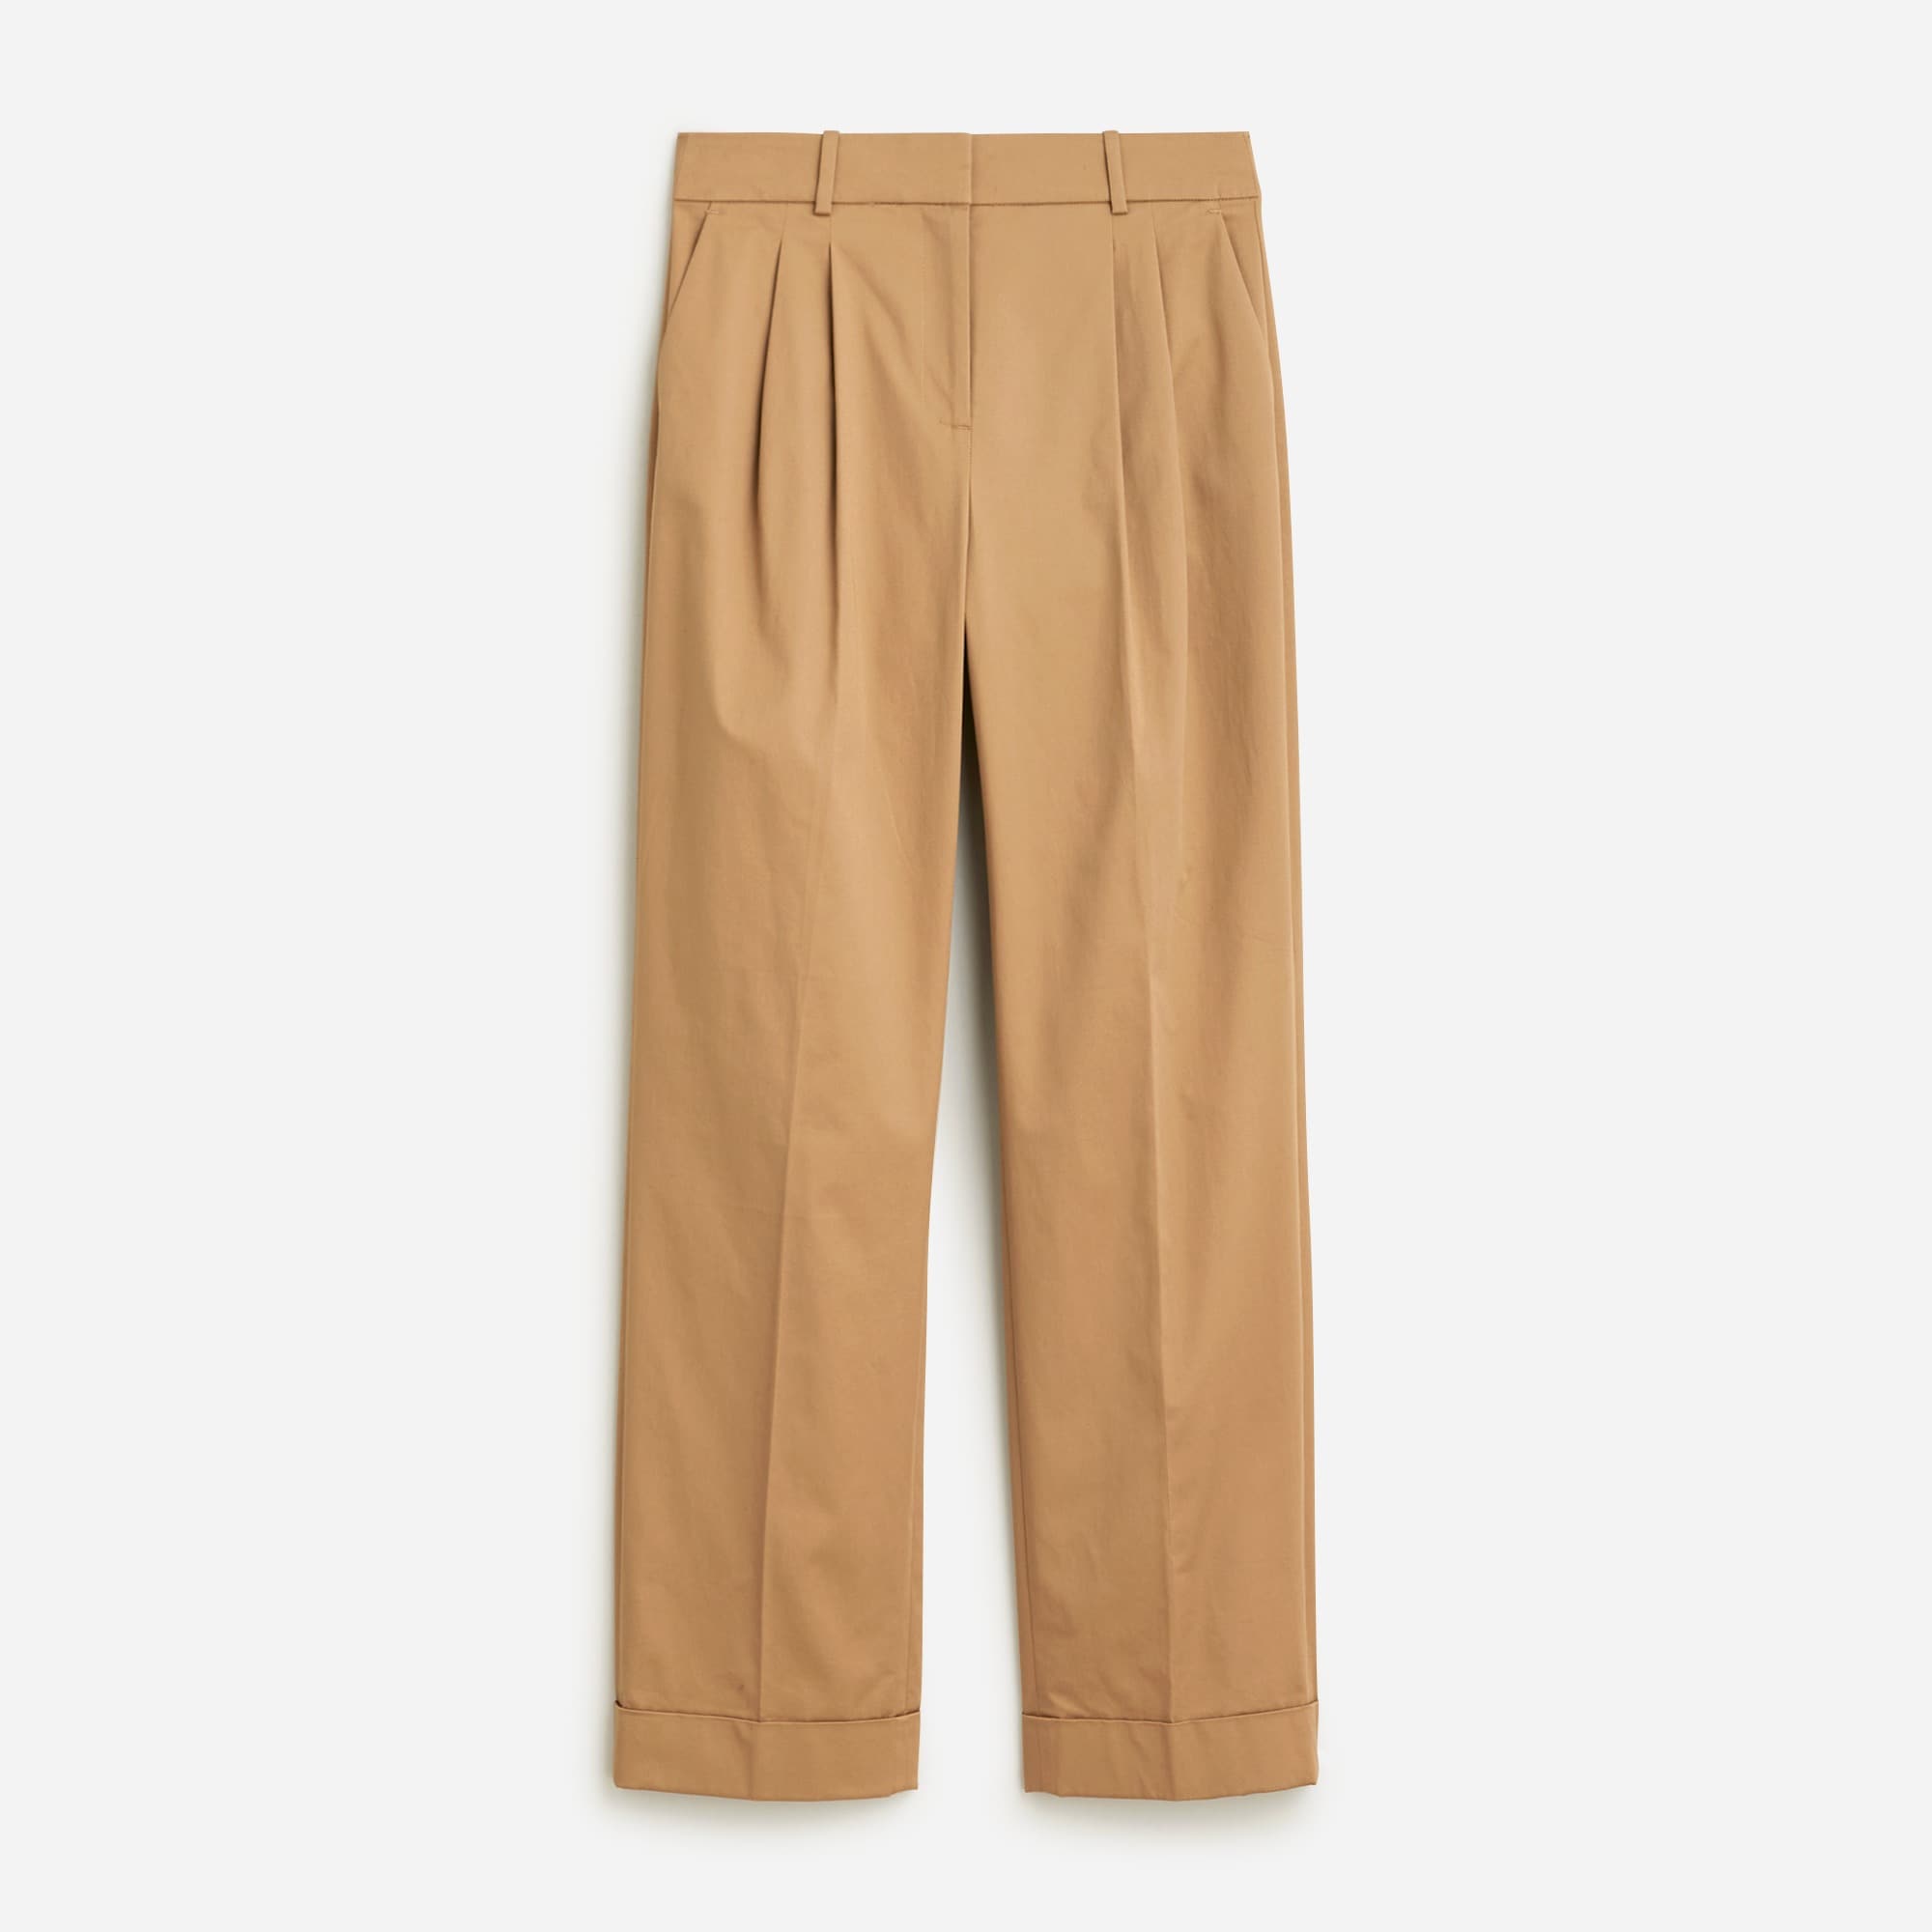  Tall wide-leg essential pant in lightweight chino